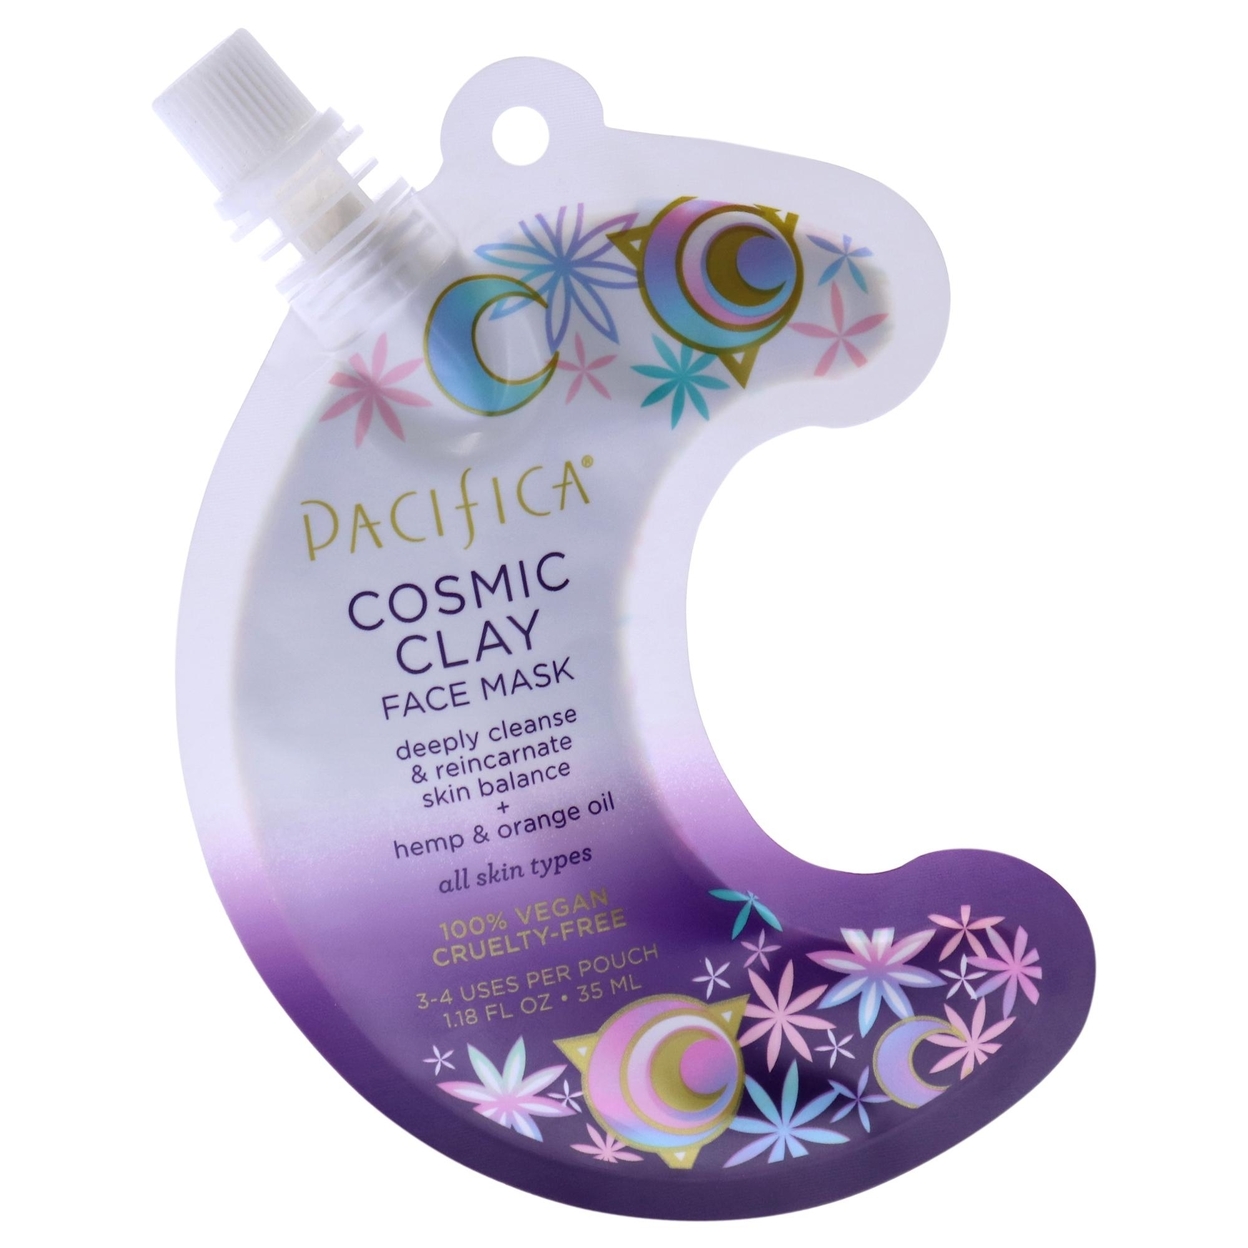 Pacifica Cosmic Clay Face Mask 1.18 Oz